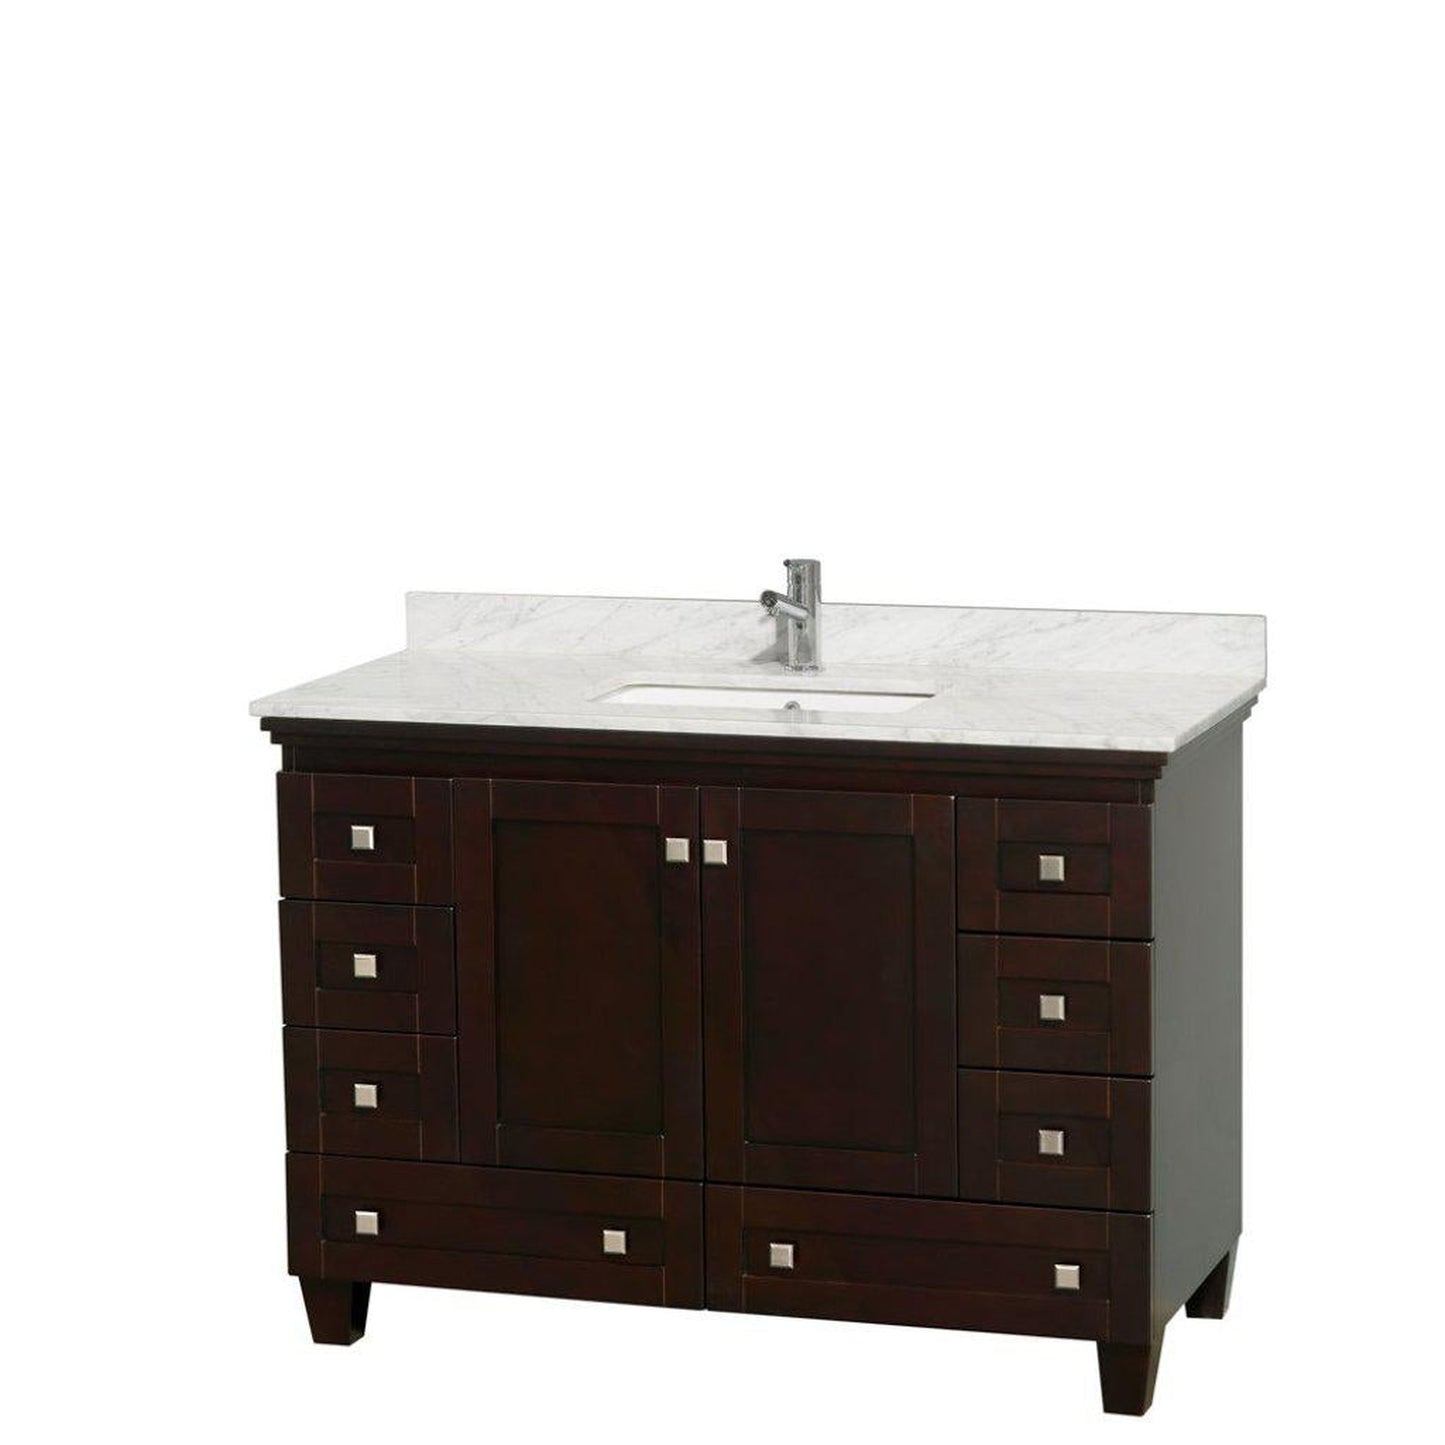 Wyndham Collection Acclaim 48" Single Bathroom Espresso Vanity With White Carrara Marble Countertop And Undermount Square Sink